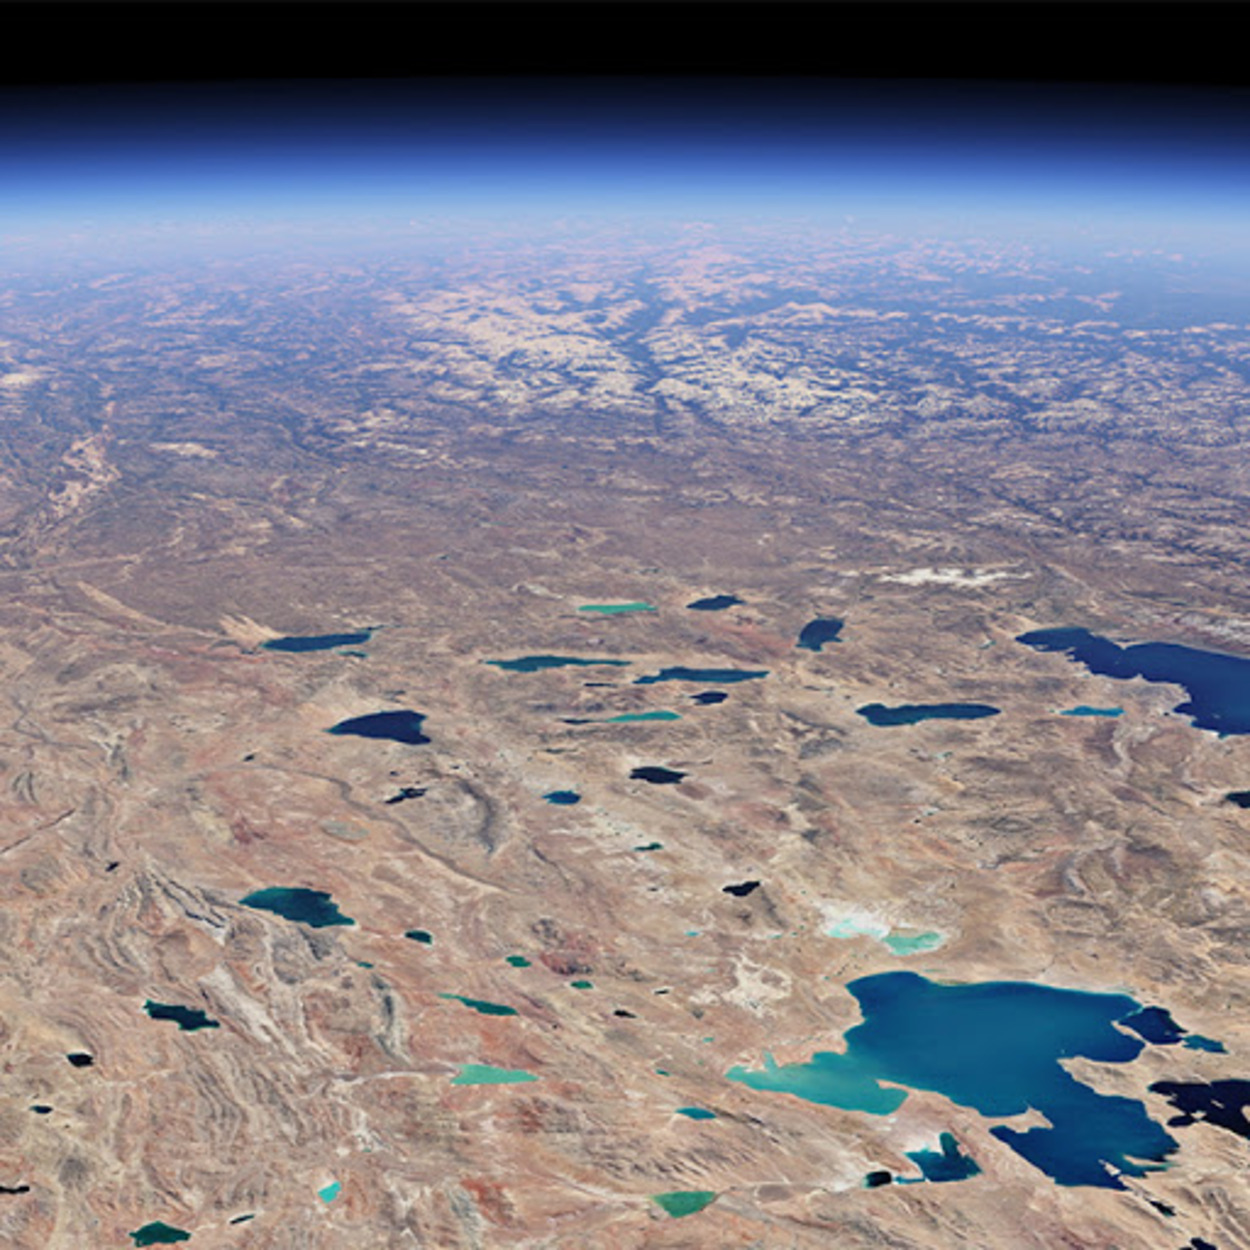 Can You Use Google Earth Without Downloading It? [Find Out]